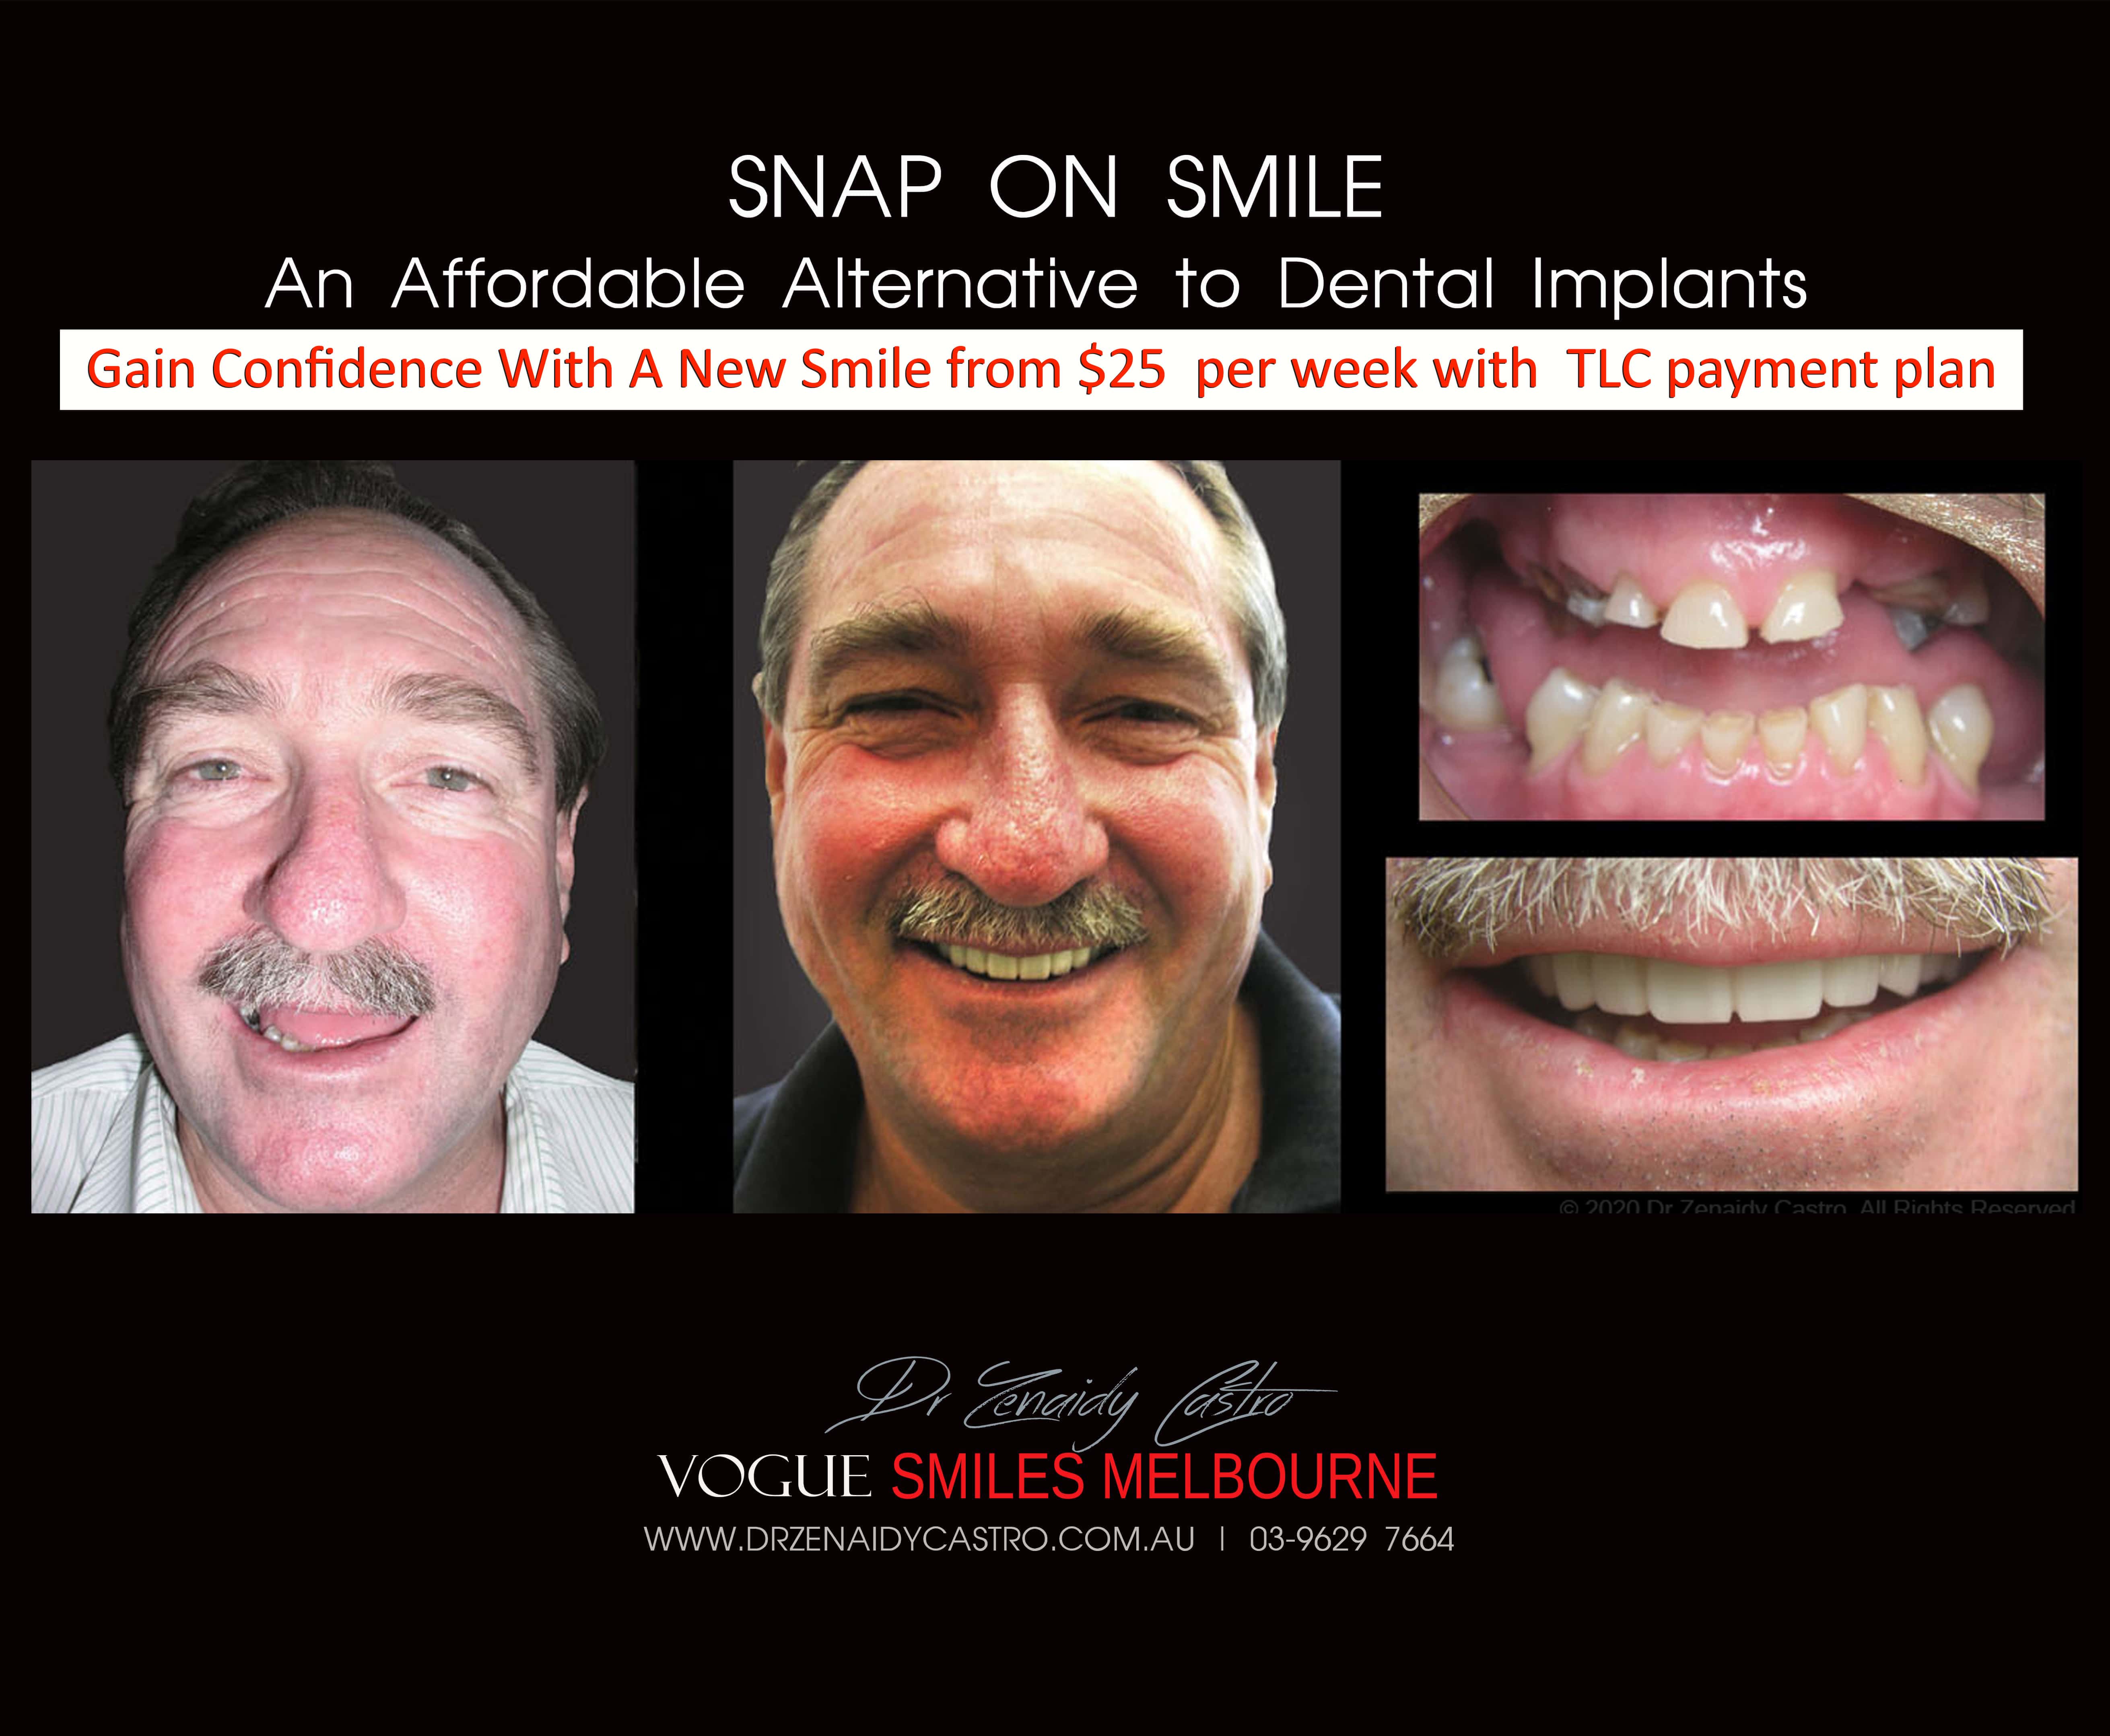 Cheaper alternative to Dental Implants, All-on 4 implants & Bridges in replacing missing teeth with Snap-on Smile Melbourne CBD- Cheap affordable Cosmetic Dentistry in Melbourne Victoria Australia